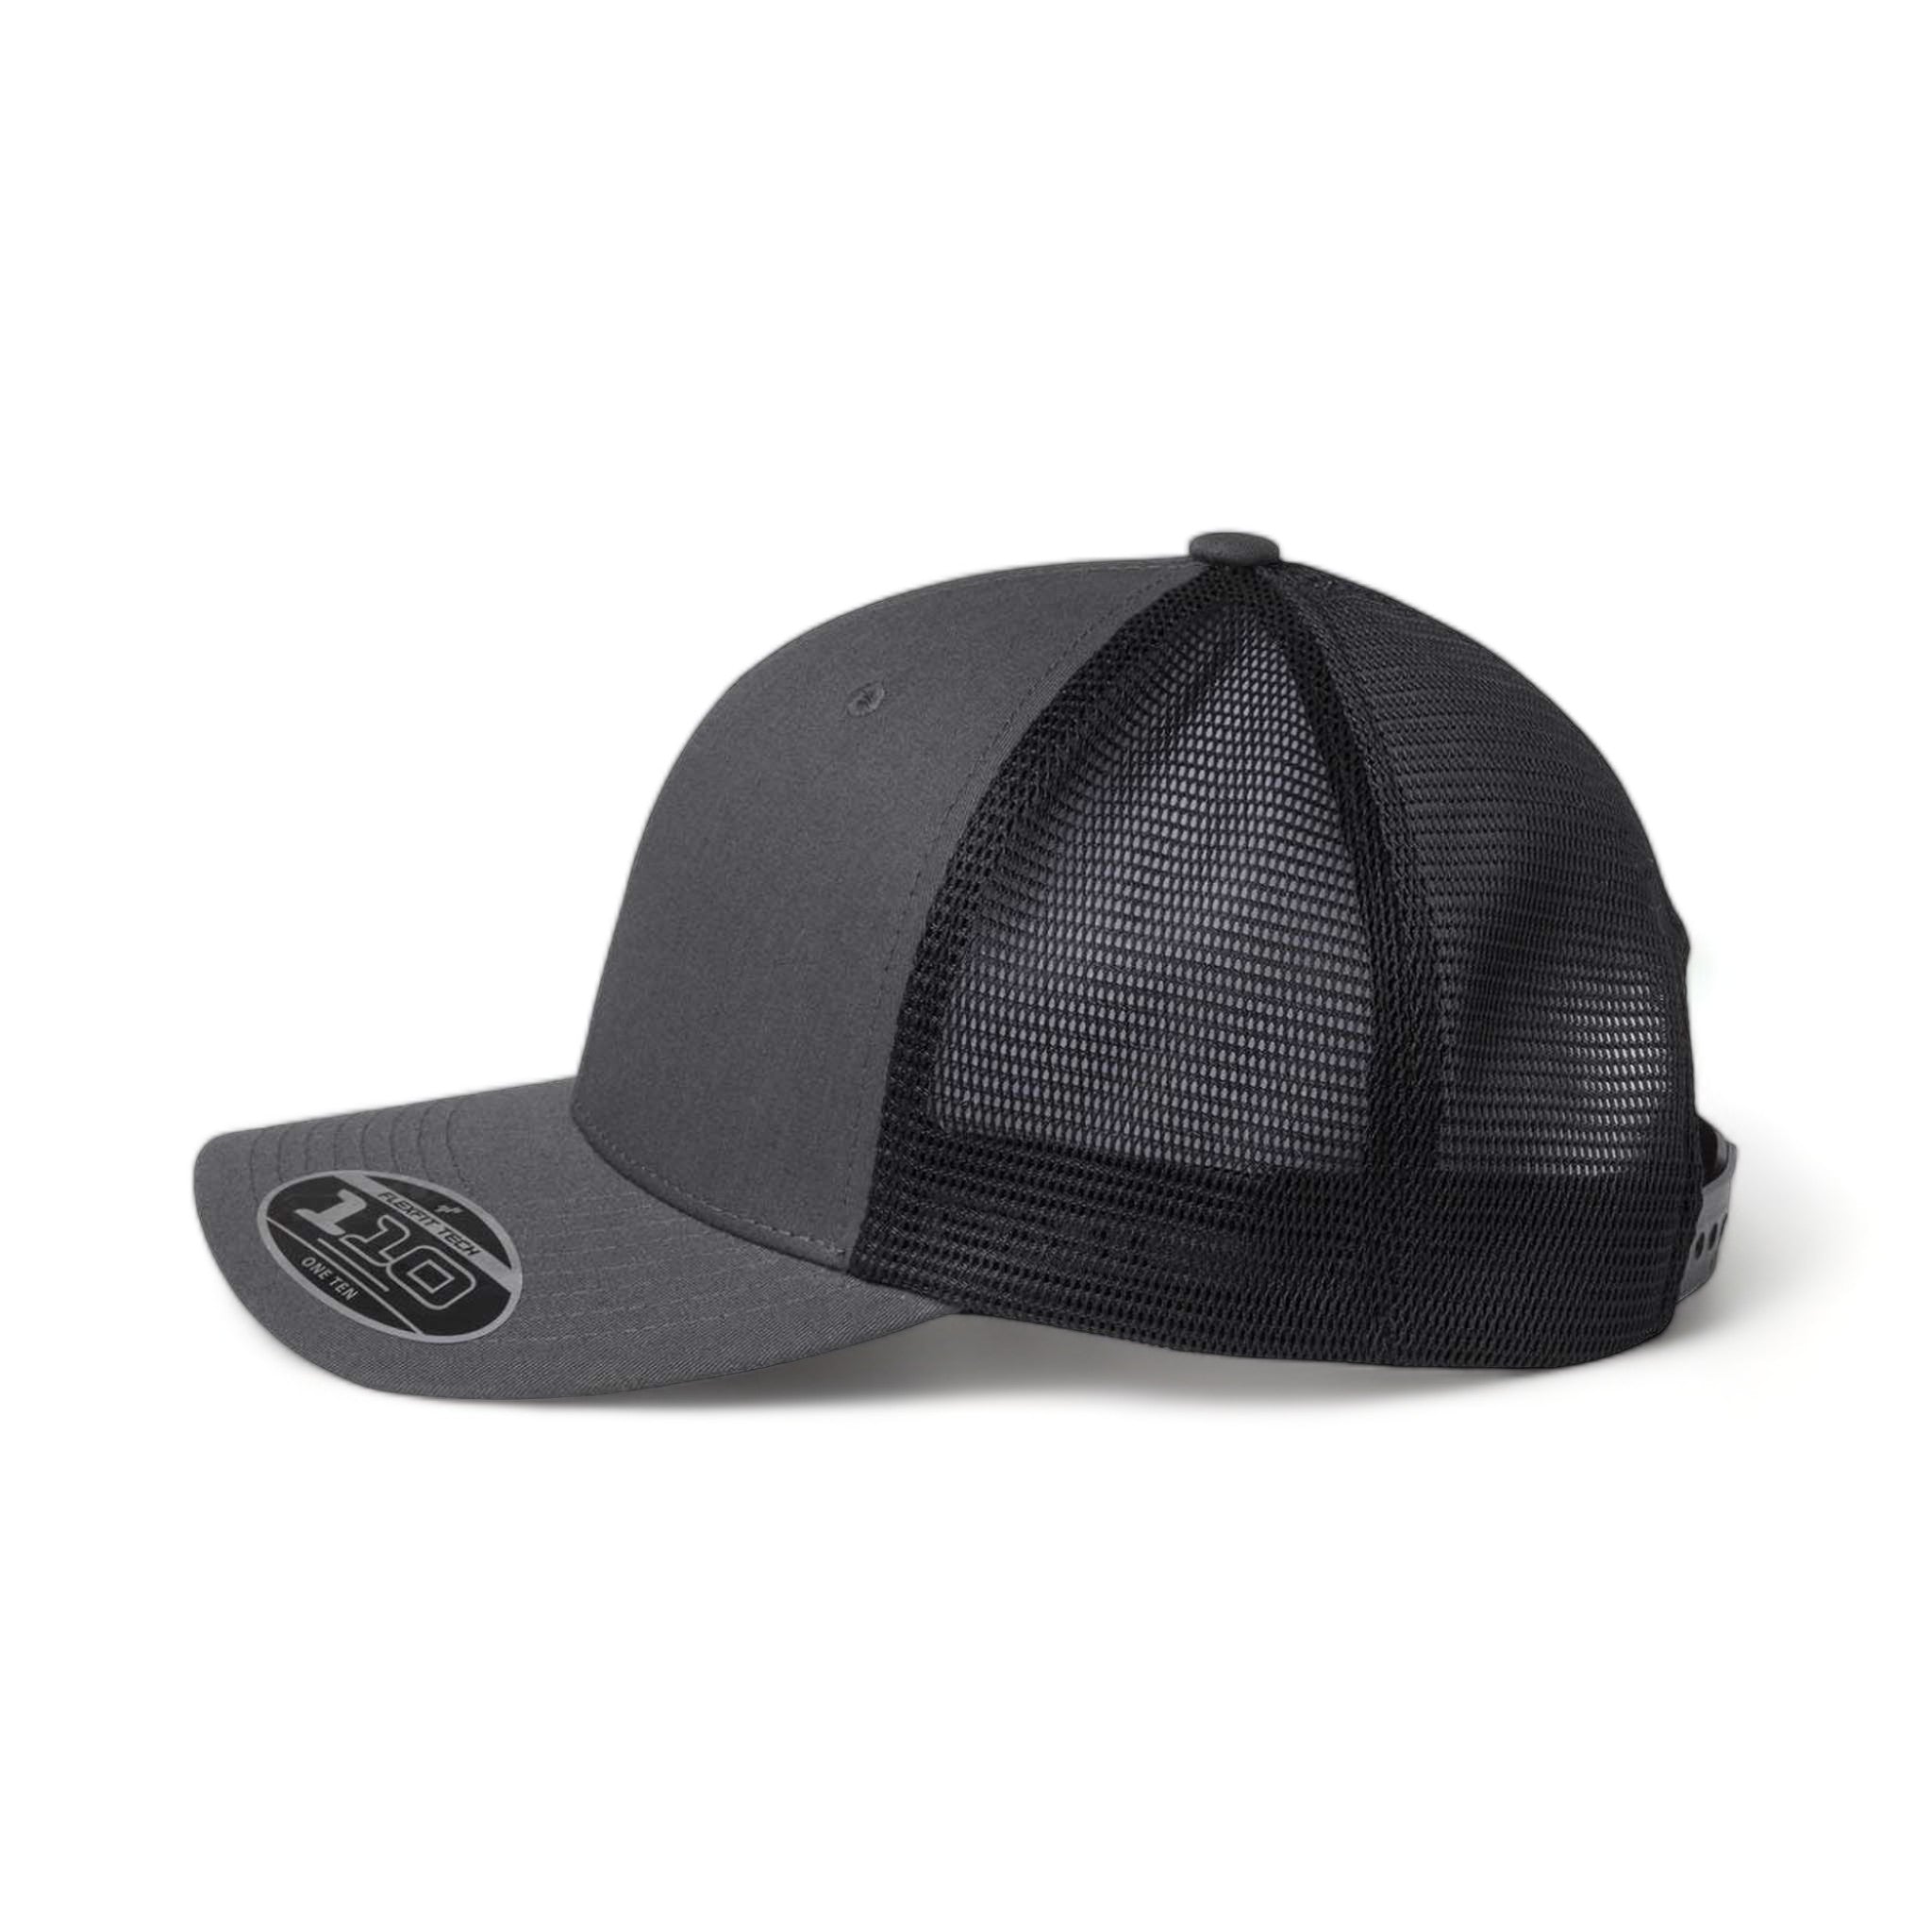 Side view of Flexfit 110M custom hat in charcoal and black